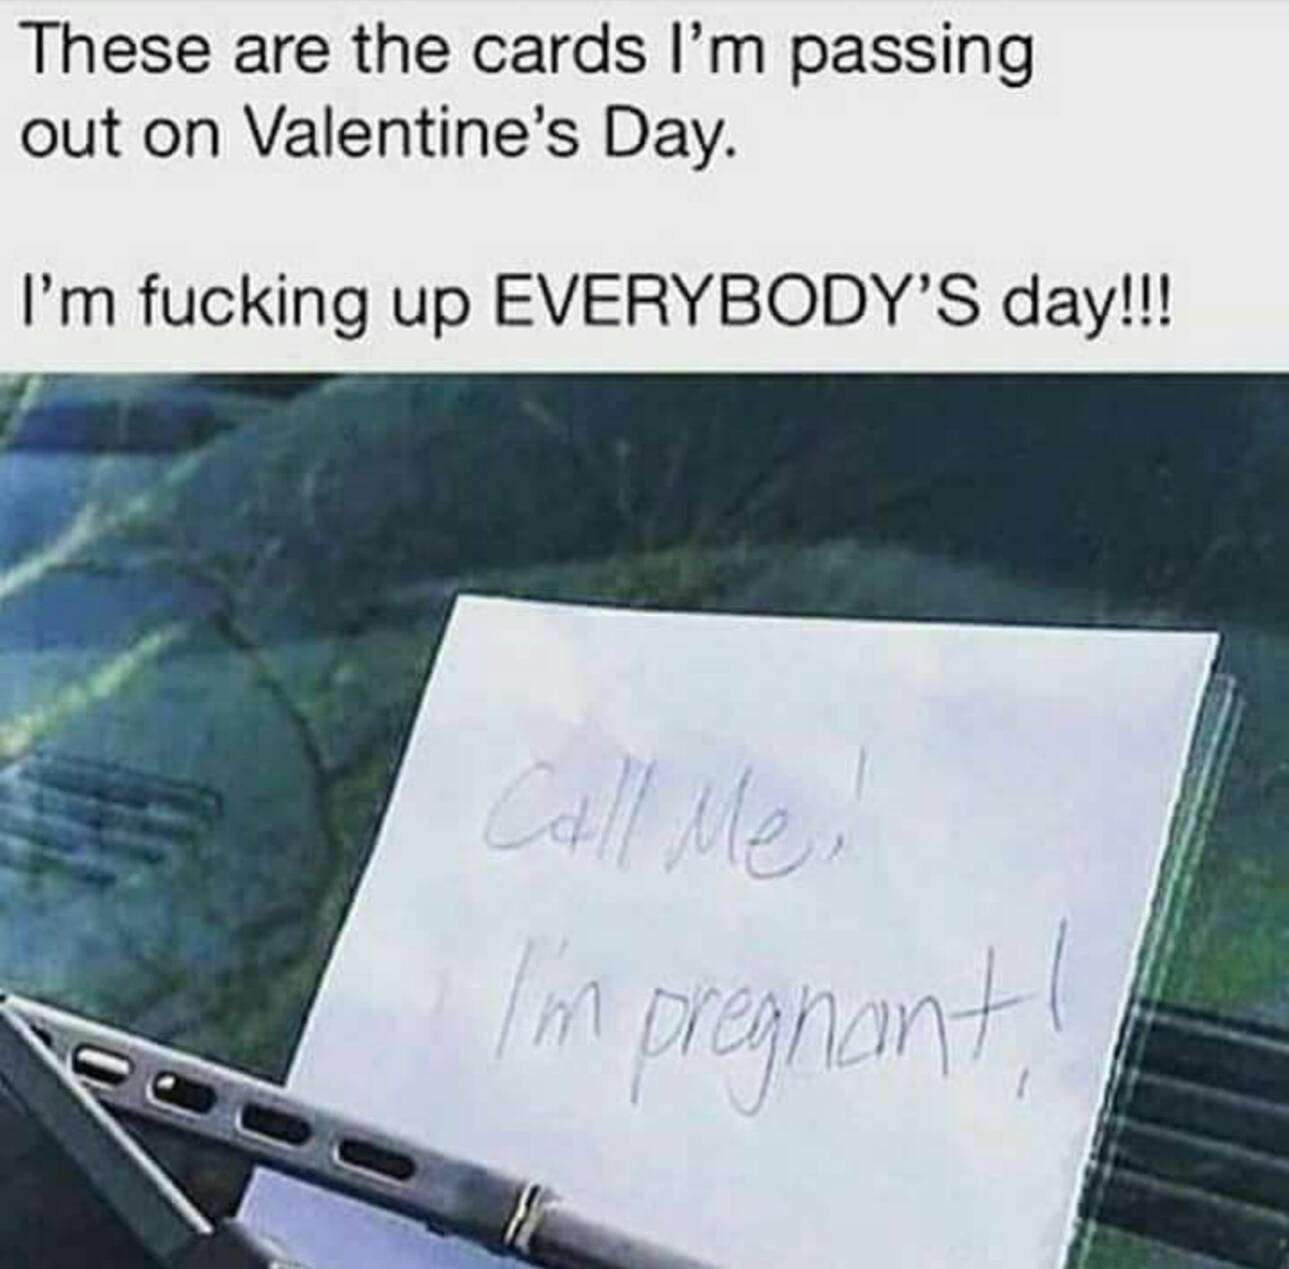 memes - i m pregnant note on car - These are the cards I'm passing out on Valentine's Day. I'm fucking up Everybody'S day!!! I'm pregnant!